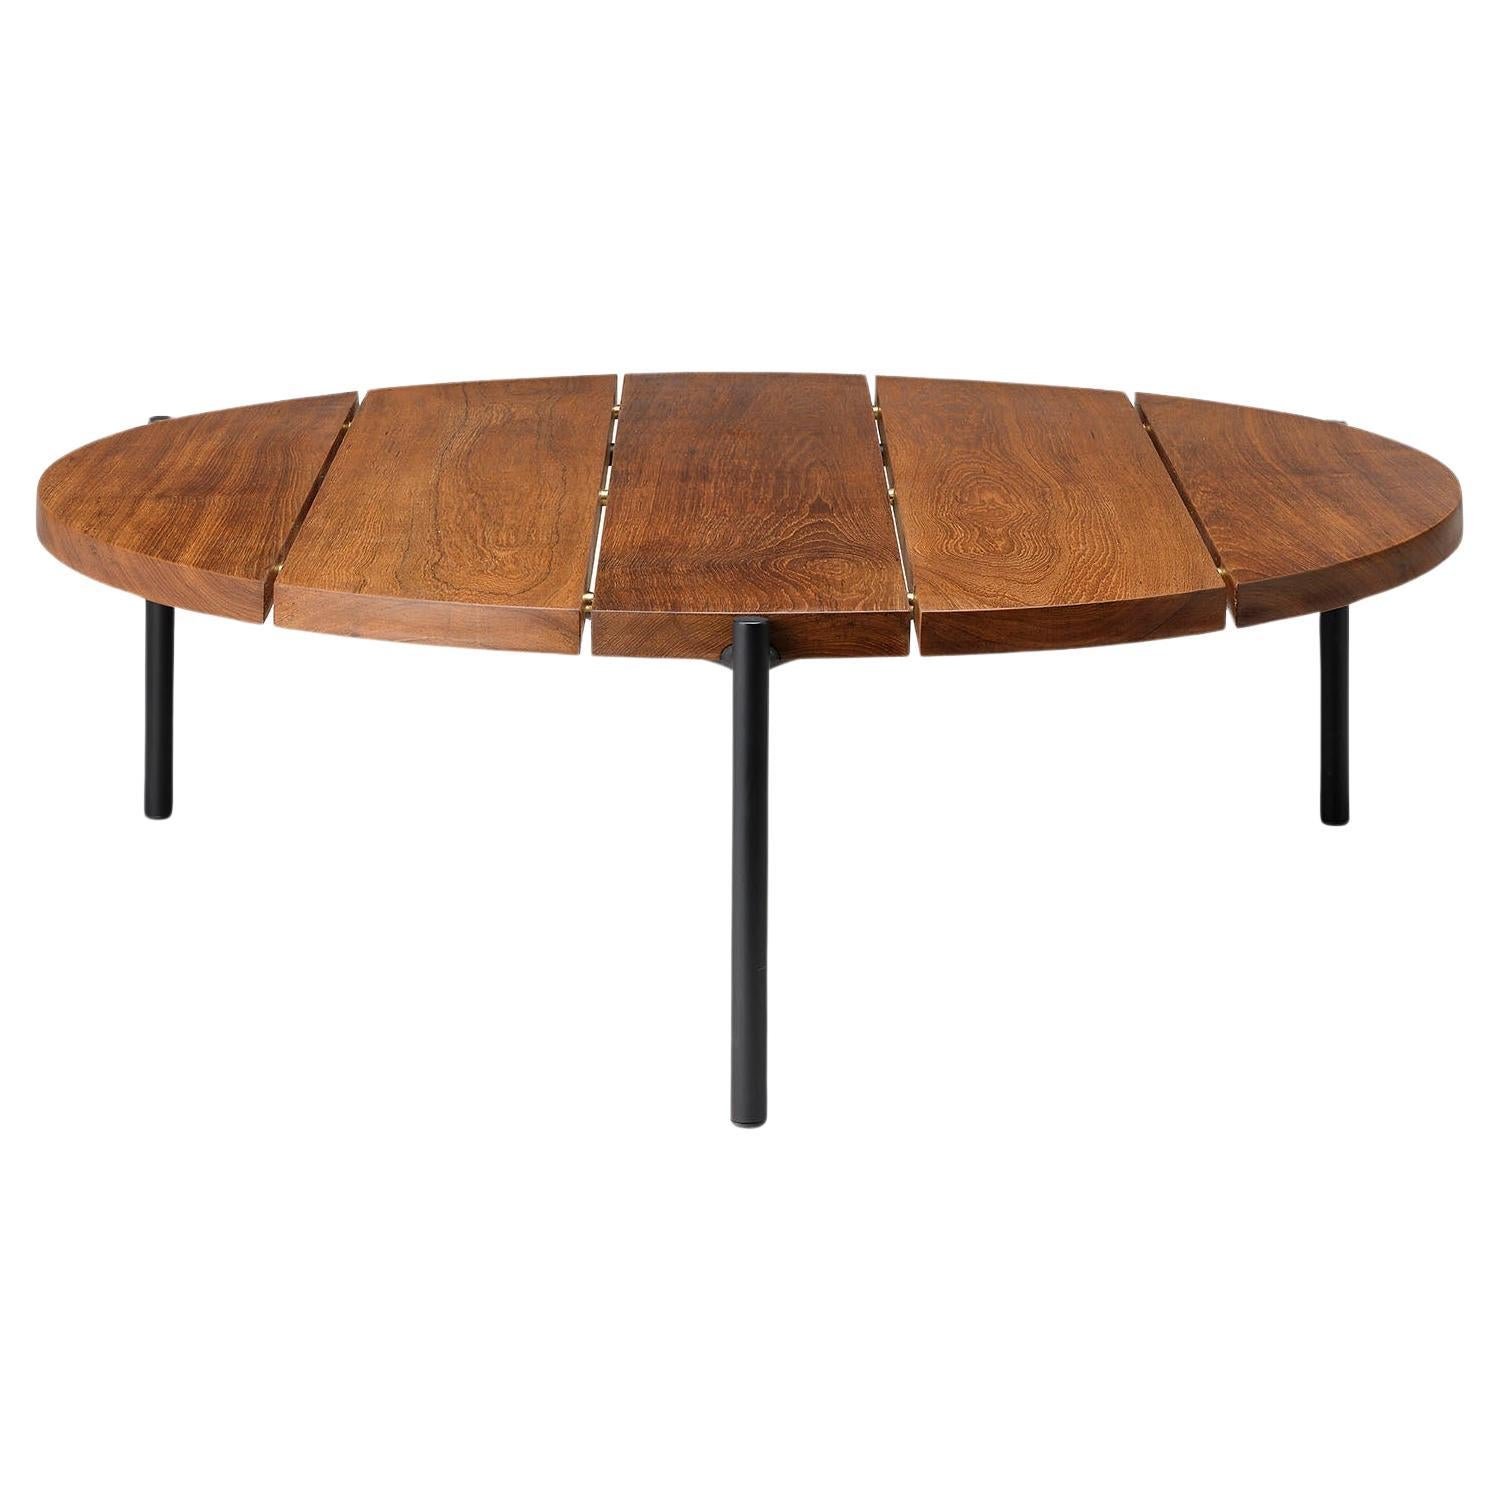 Ten10 Madeira Line Round Coffee Table Solid Plank Teak Top Stainless Steel Base  For Sale